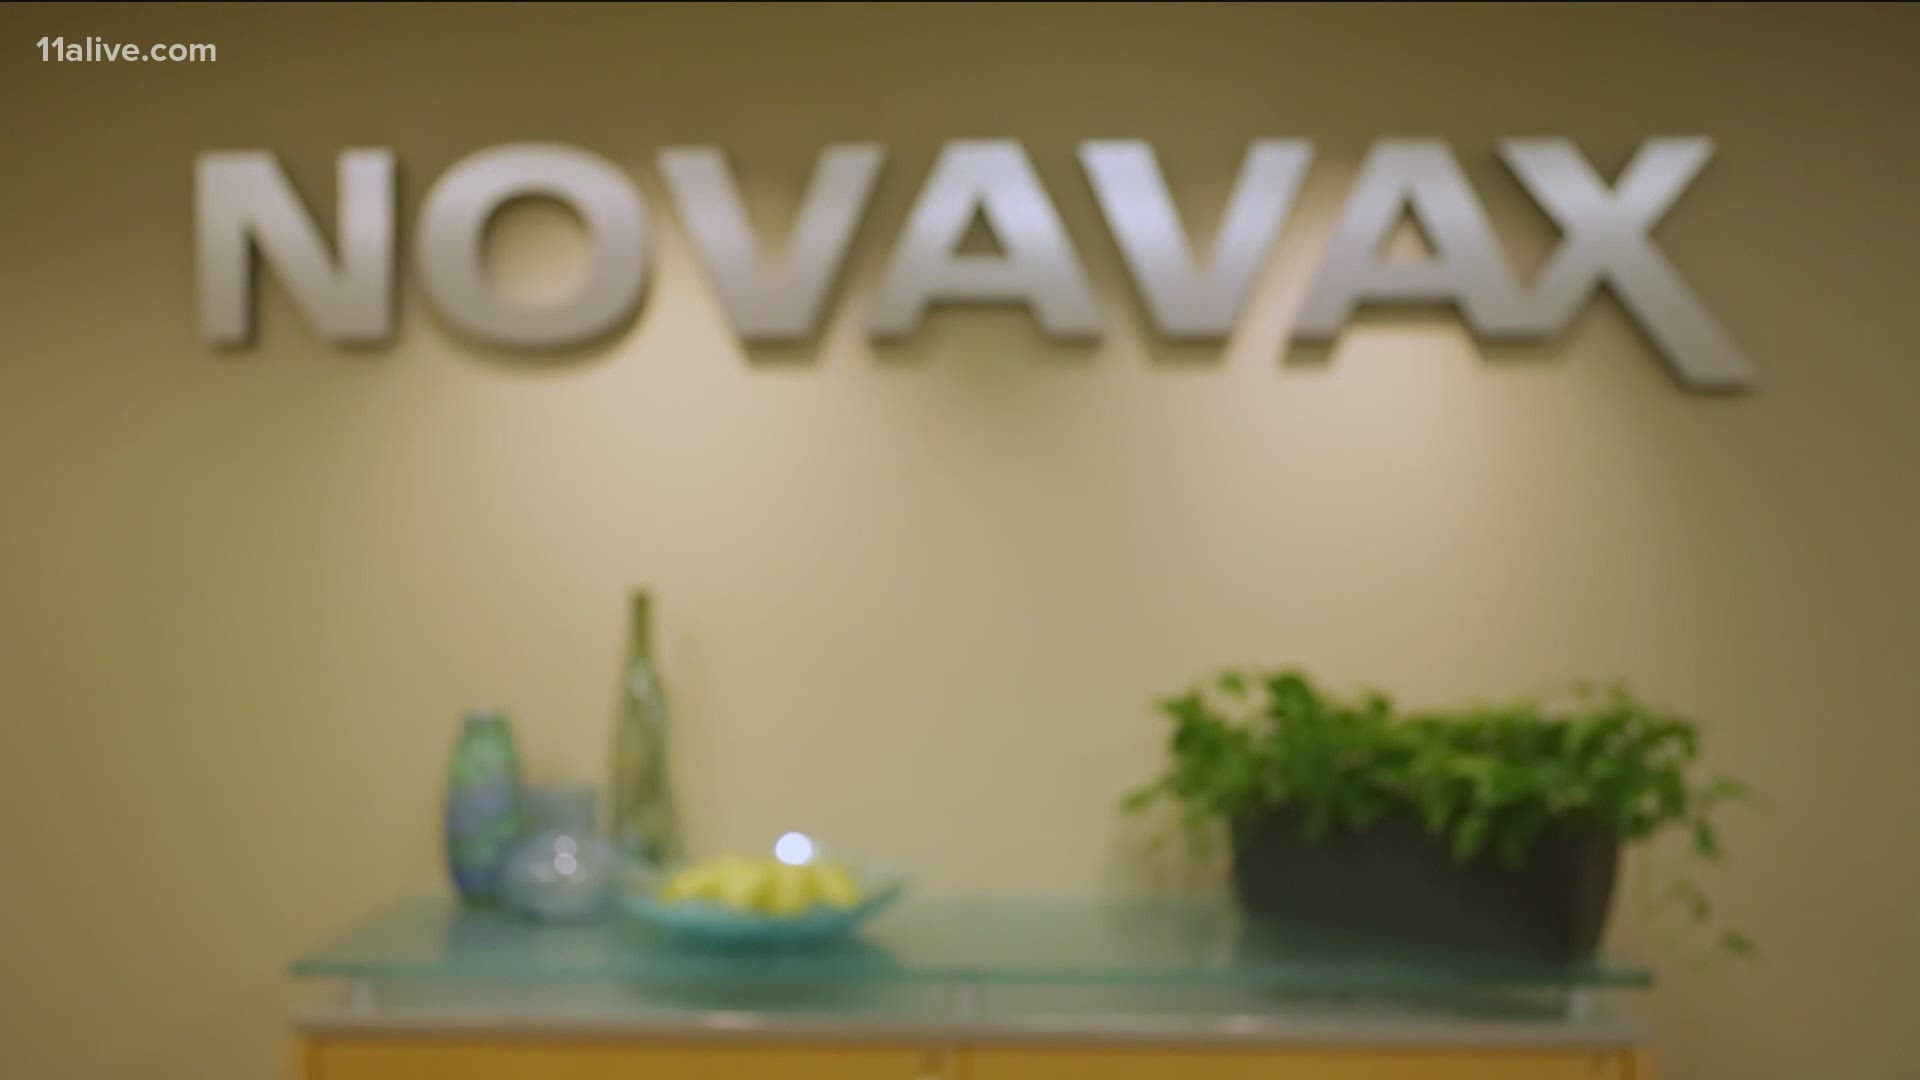 11Alive's Karys Belger breaks down what you need to know about the Novavax vaccine.